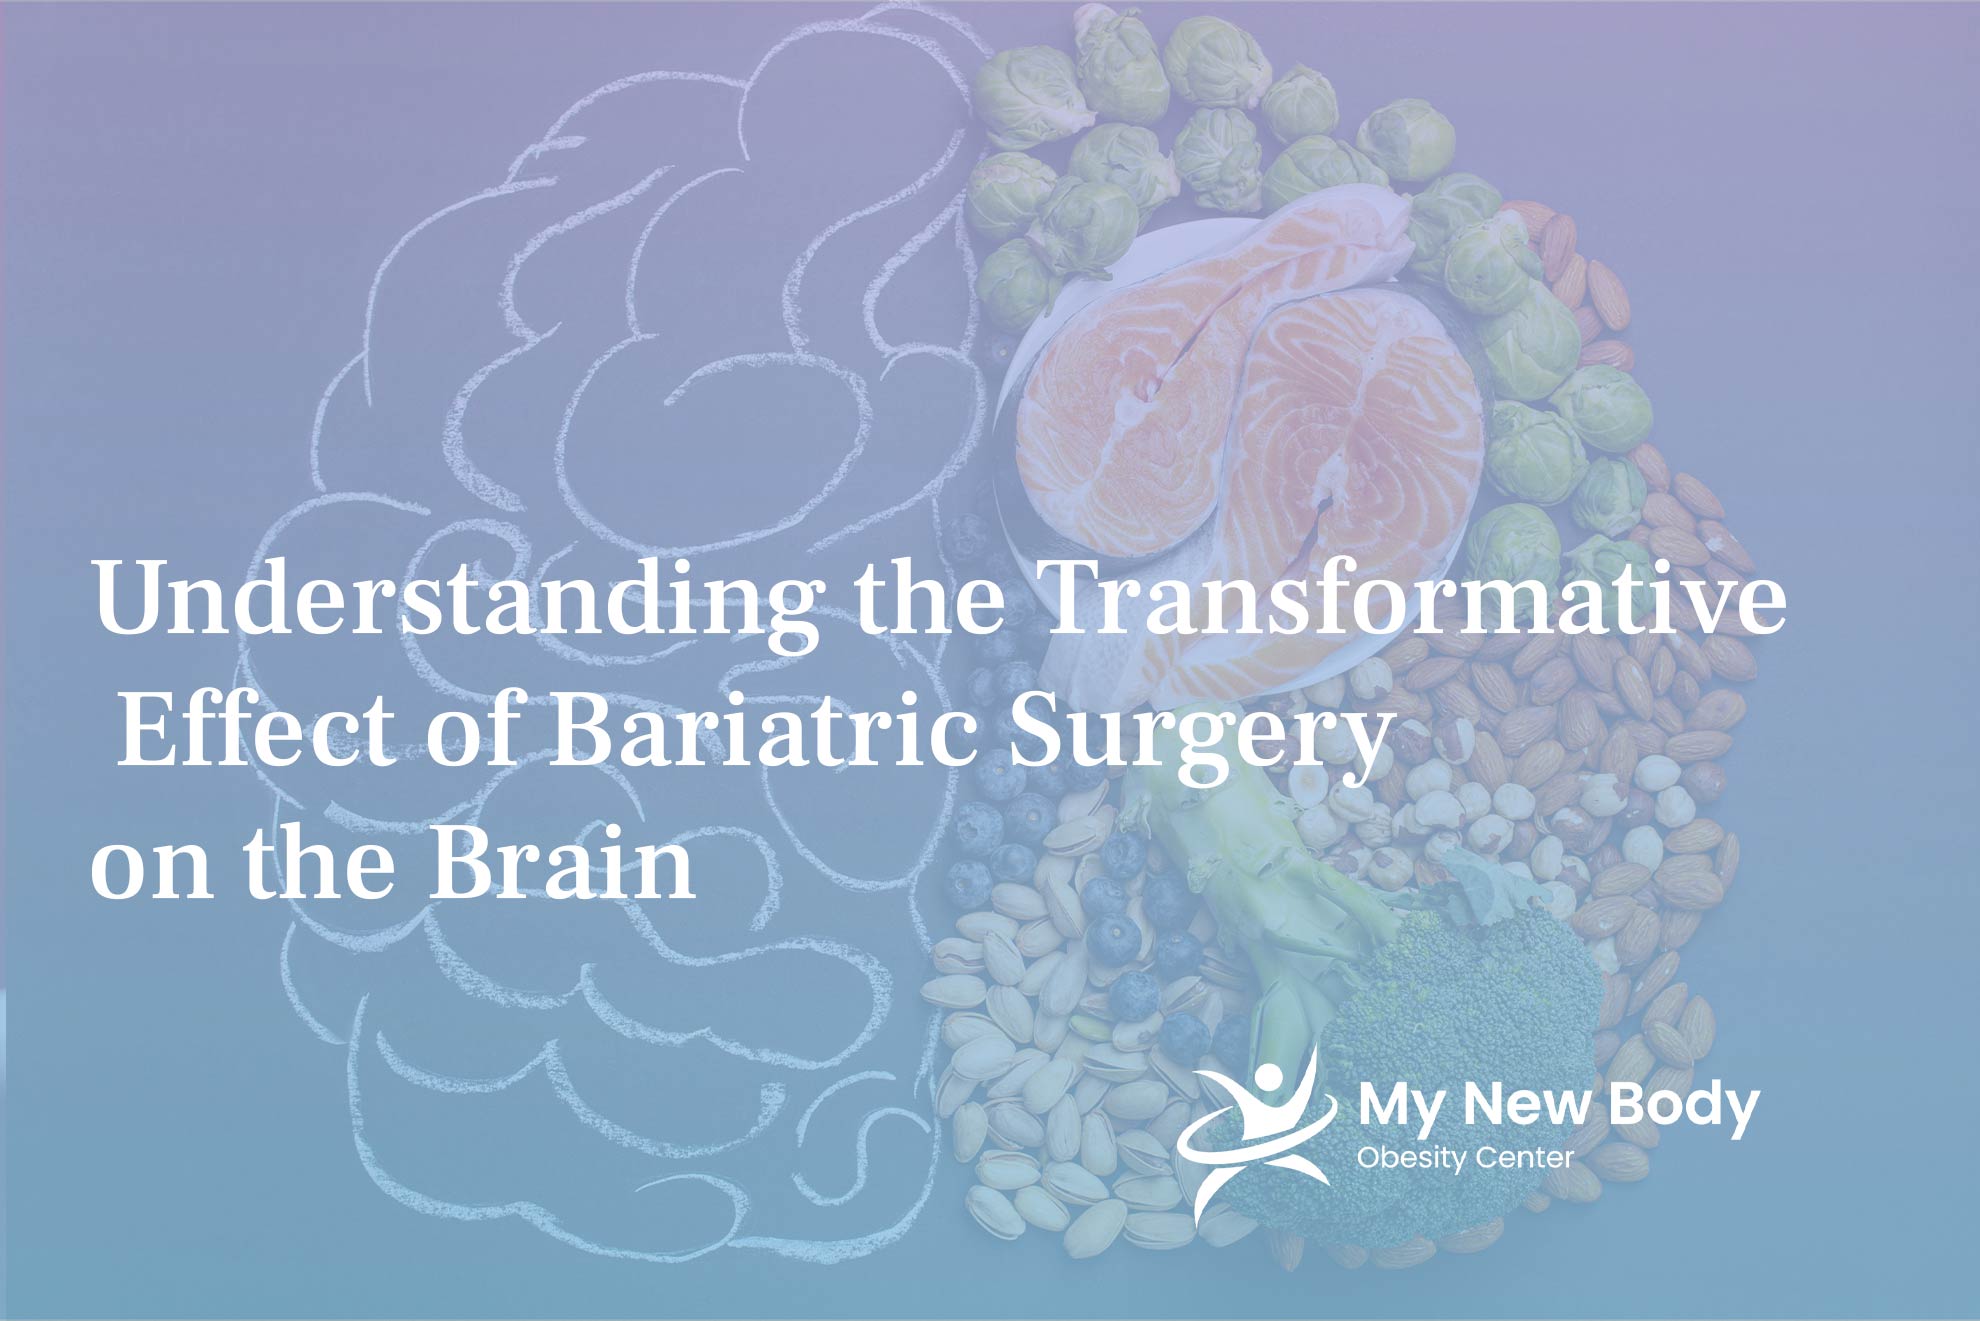 Understading the Transformative Effect of Bariatric Surgery on the Brain